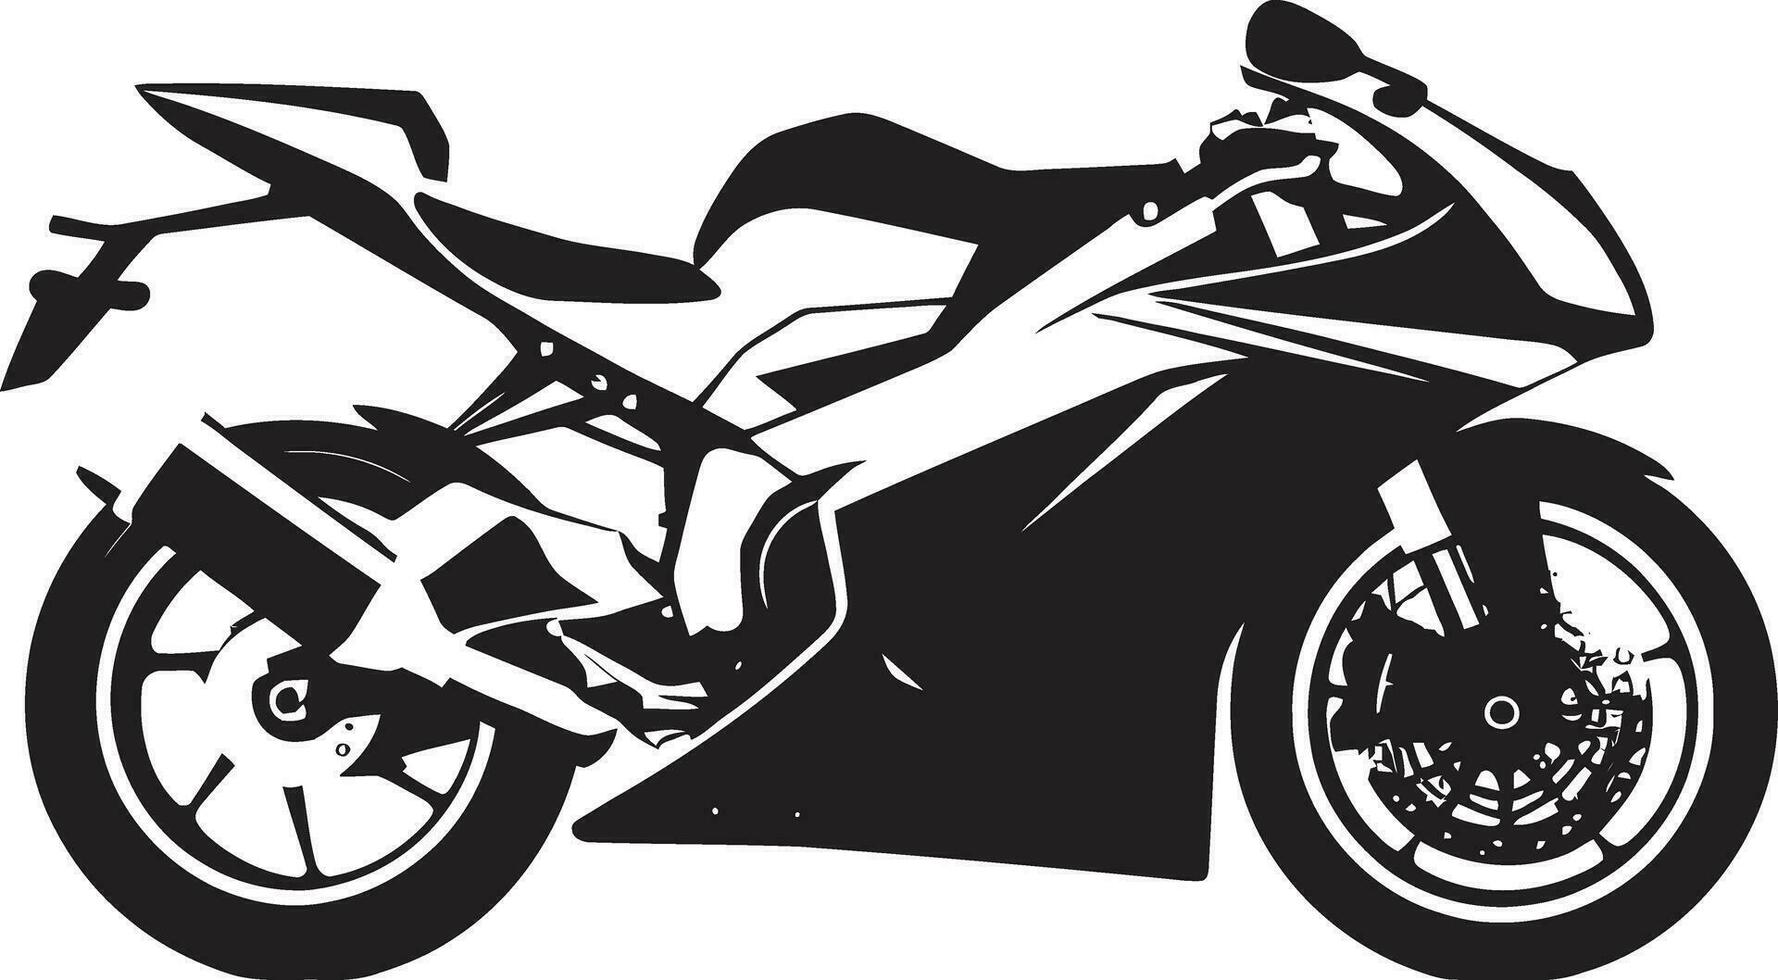 The Speedsters Canvas Sports Bike Vectors at Their Best Capturing Power Vector Art of Sports Bikes in Action